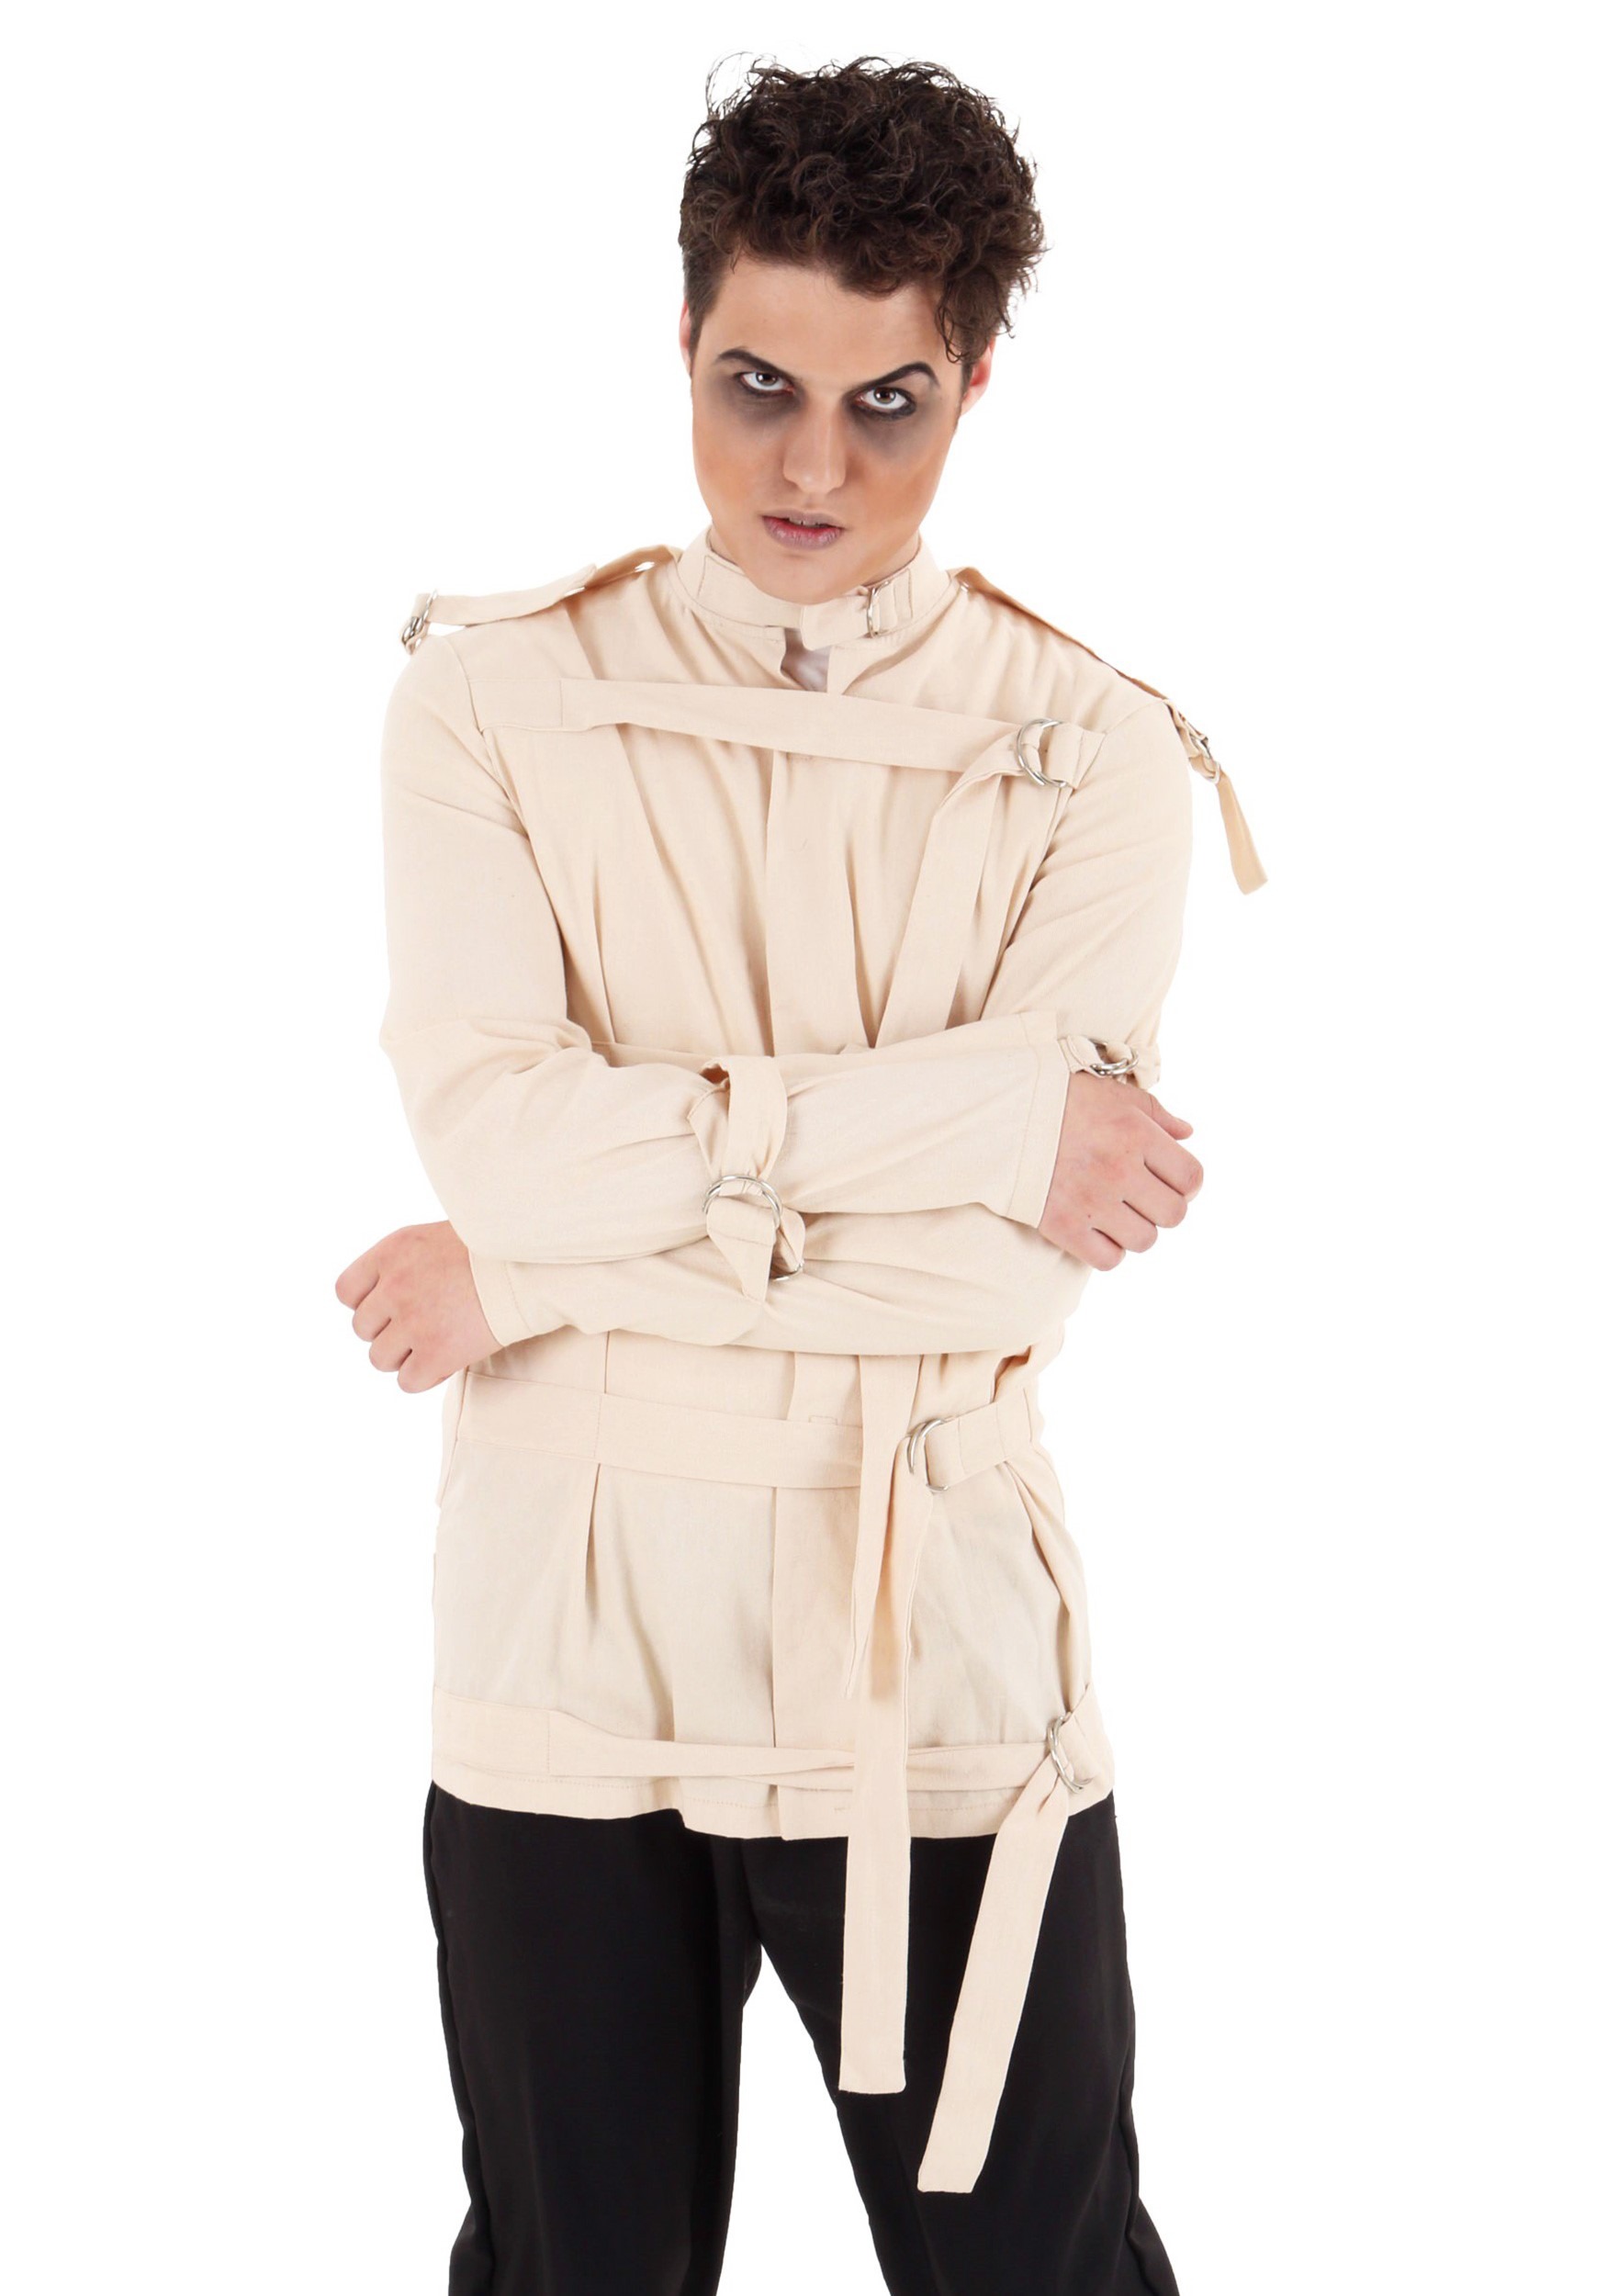 Asylum Straight Jacket Costume for Adults